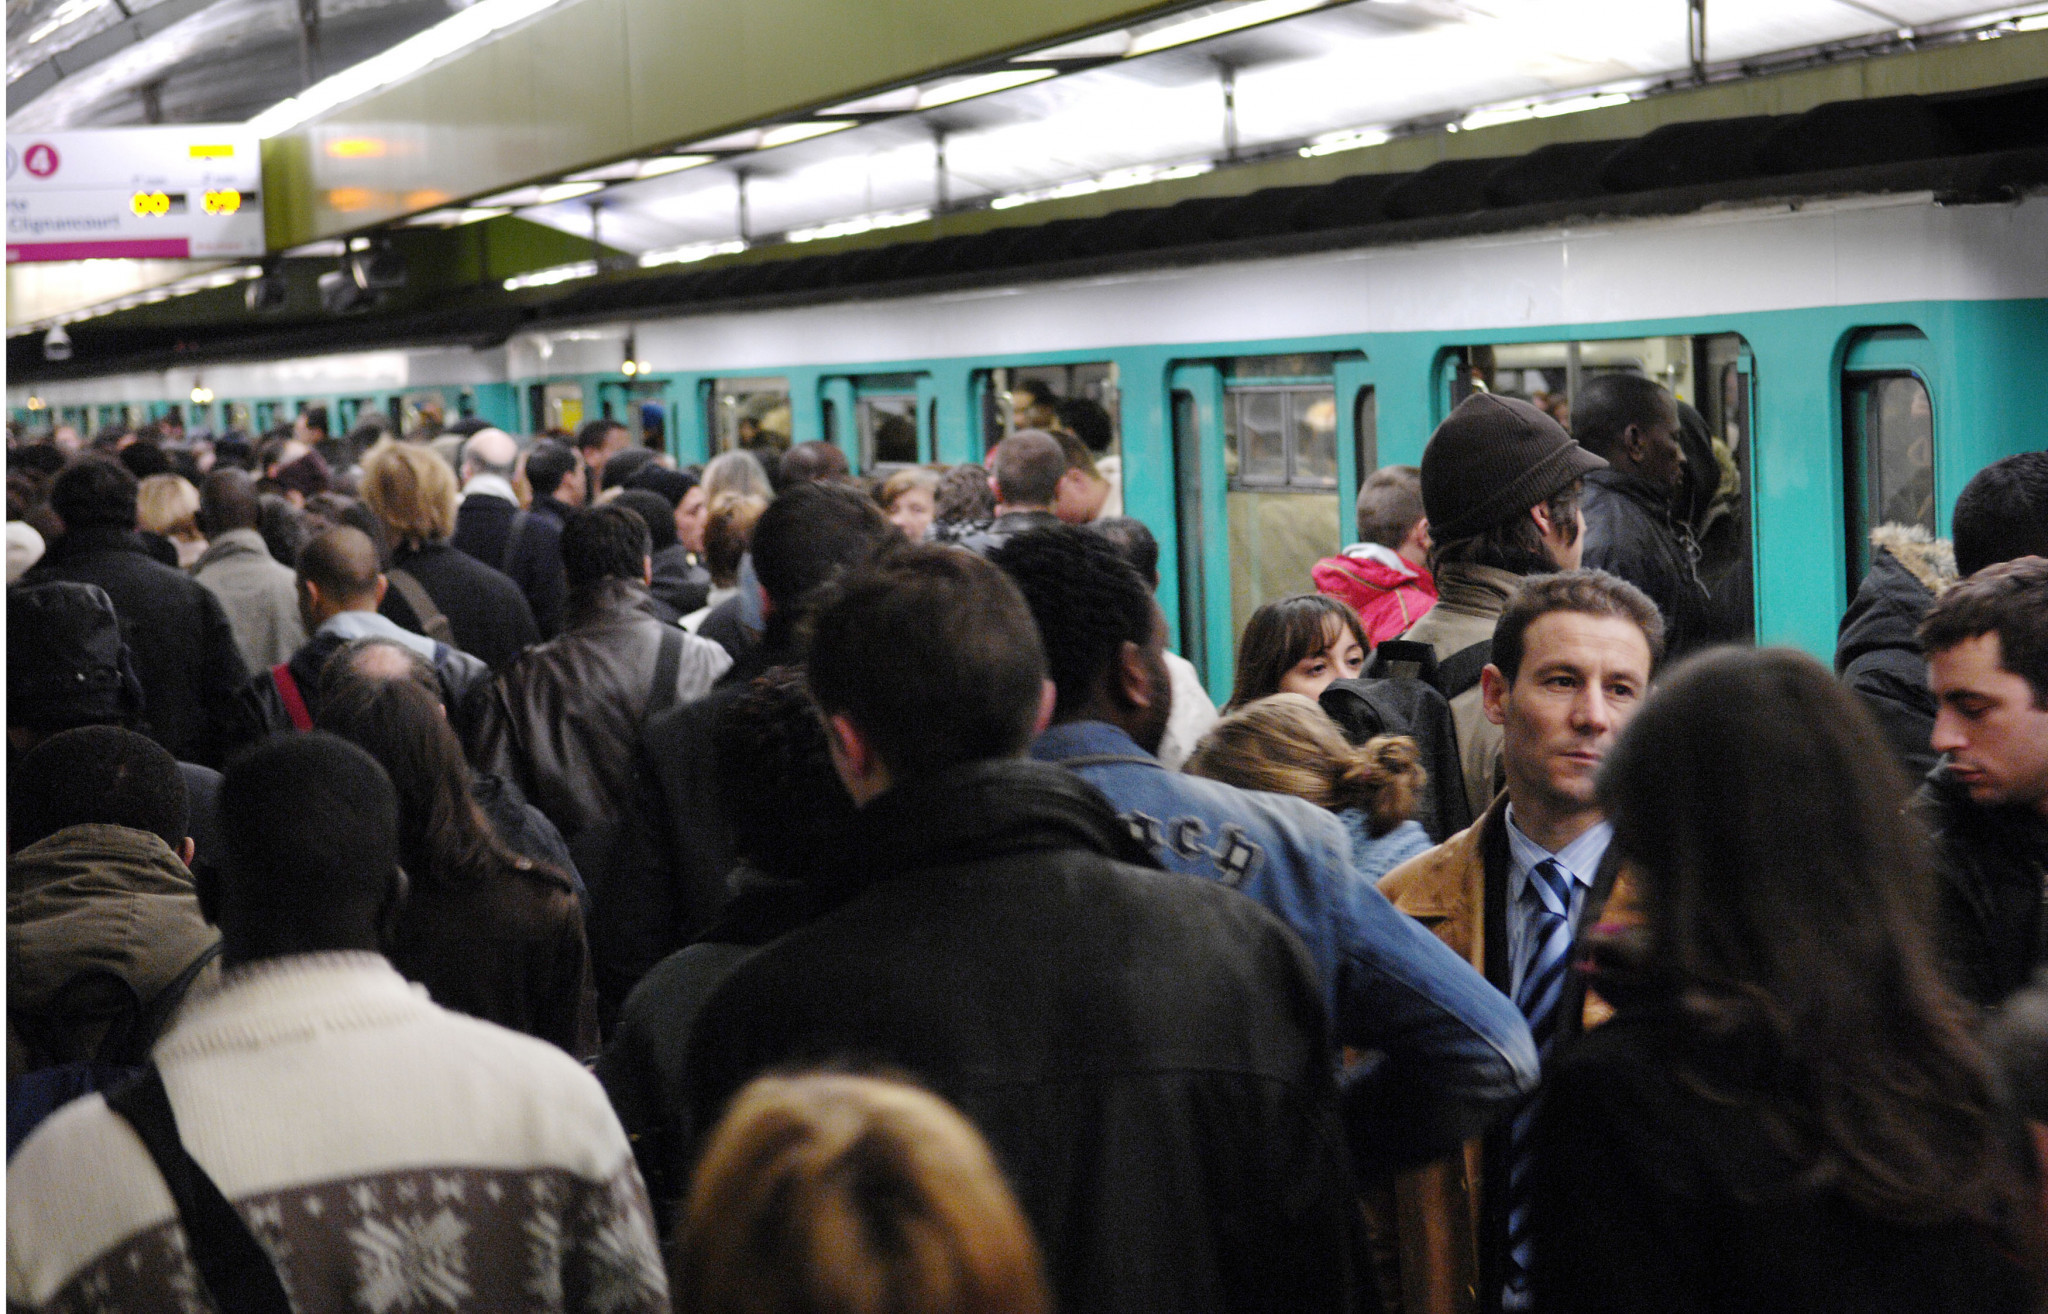 RATP is set to launch an internal investigation into a series of incidents that caused a standstill on various lines of the Paris metro ©Getty Images